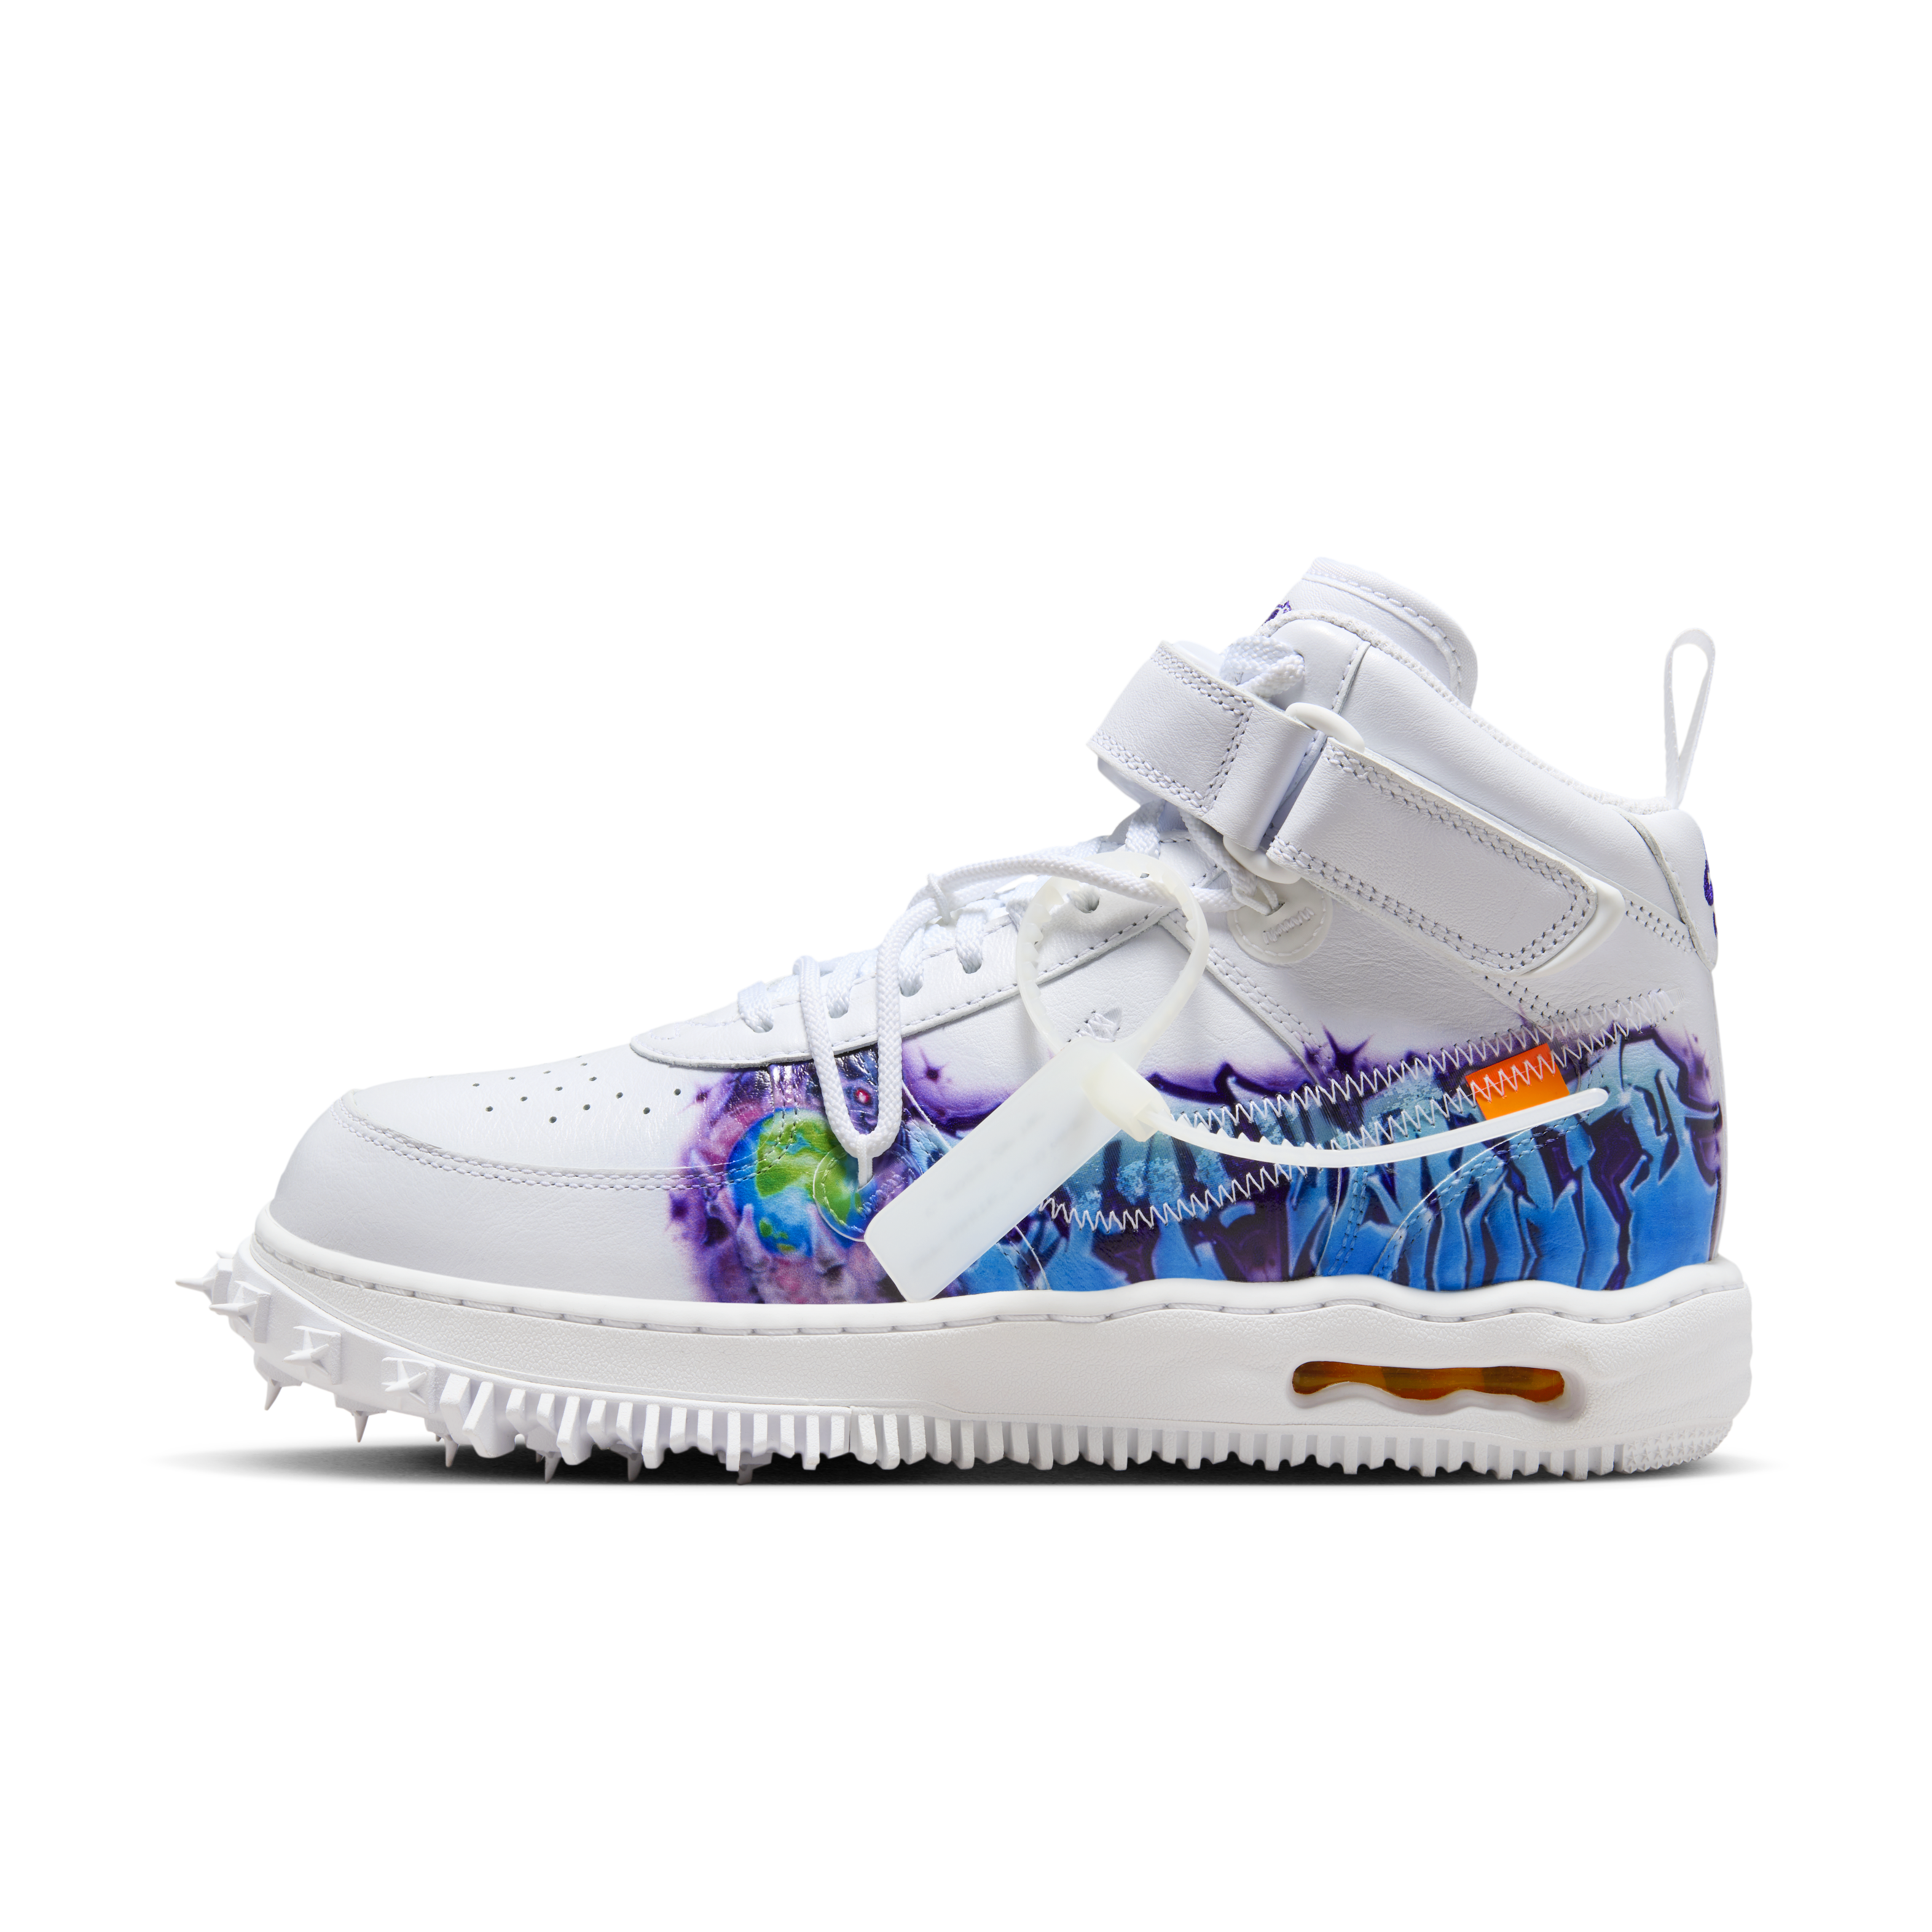 Graffiti' Off-White x Nike Air Force 1 Mids Are Available Now